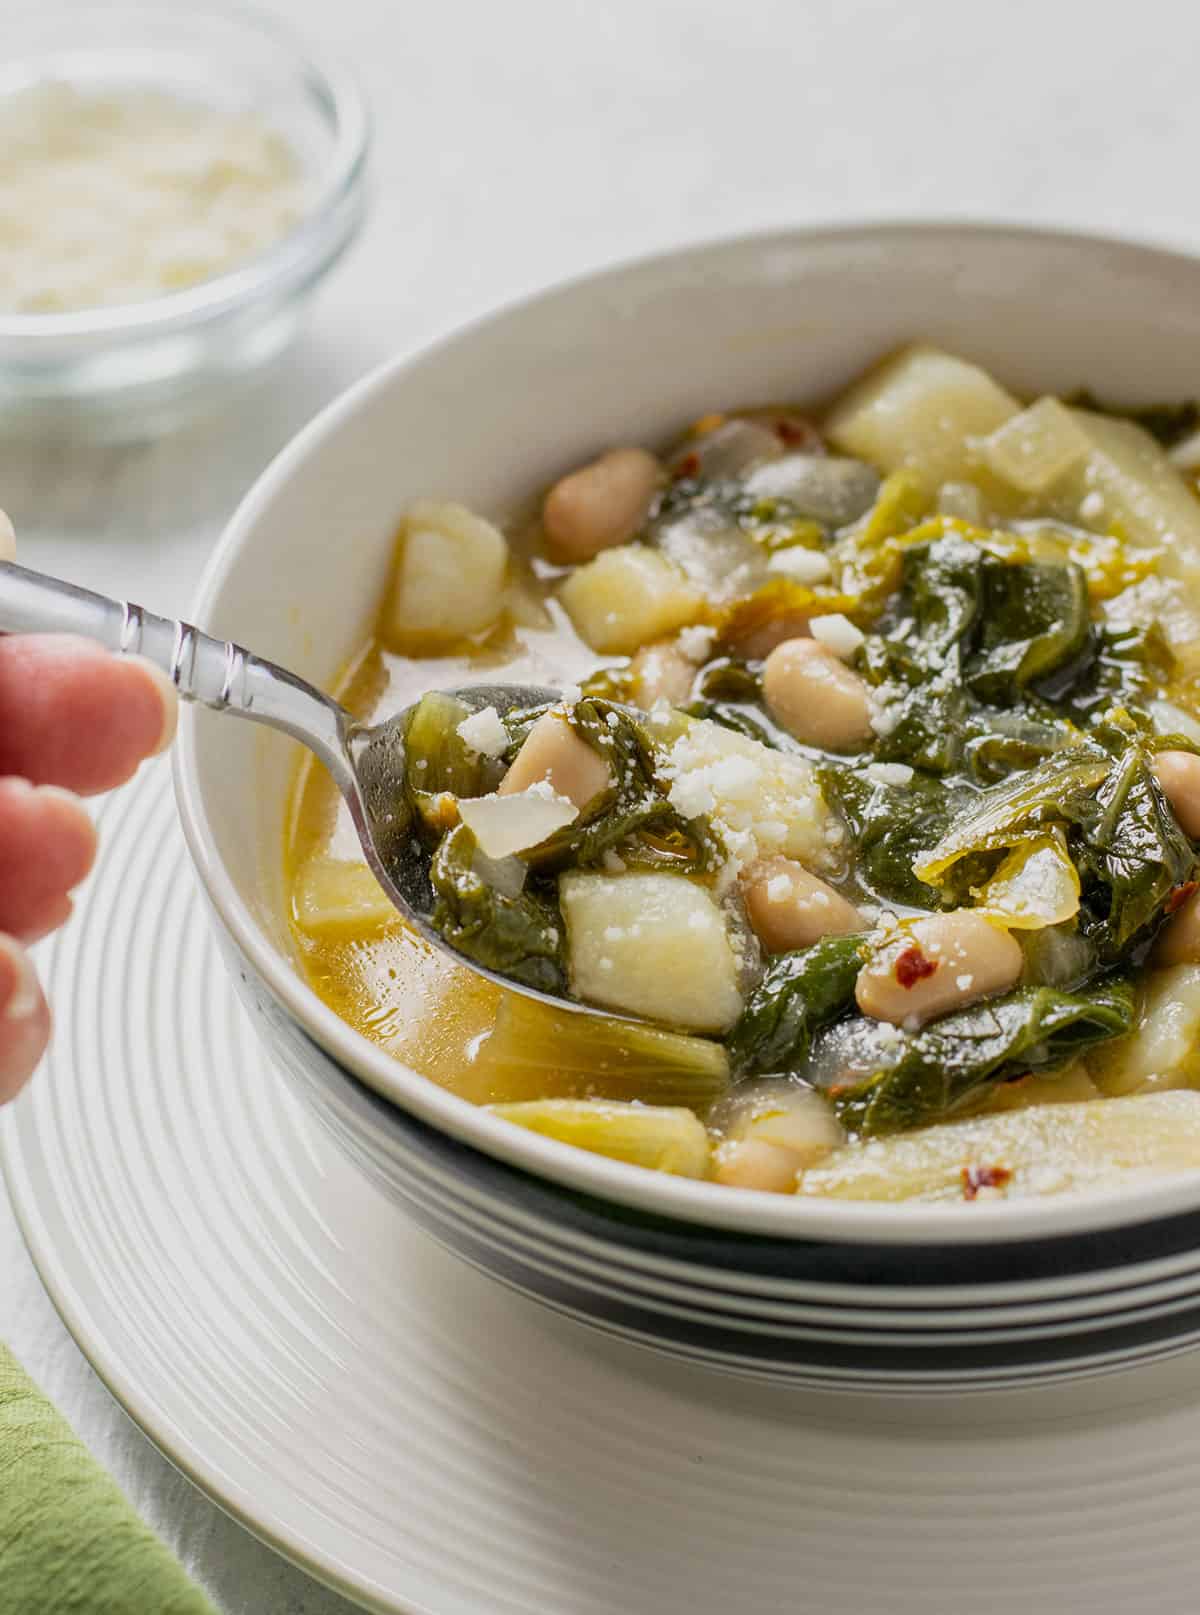 prepared escarole soup with beans and potatoes in a bowl